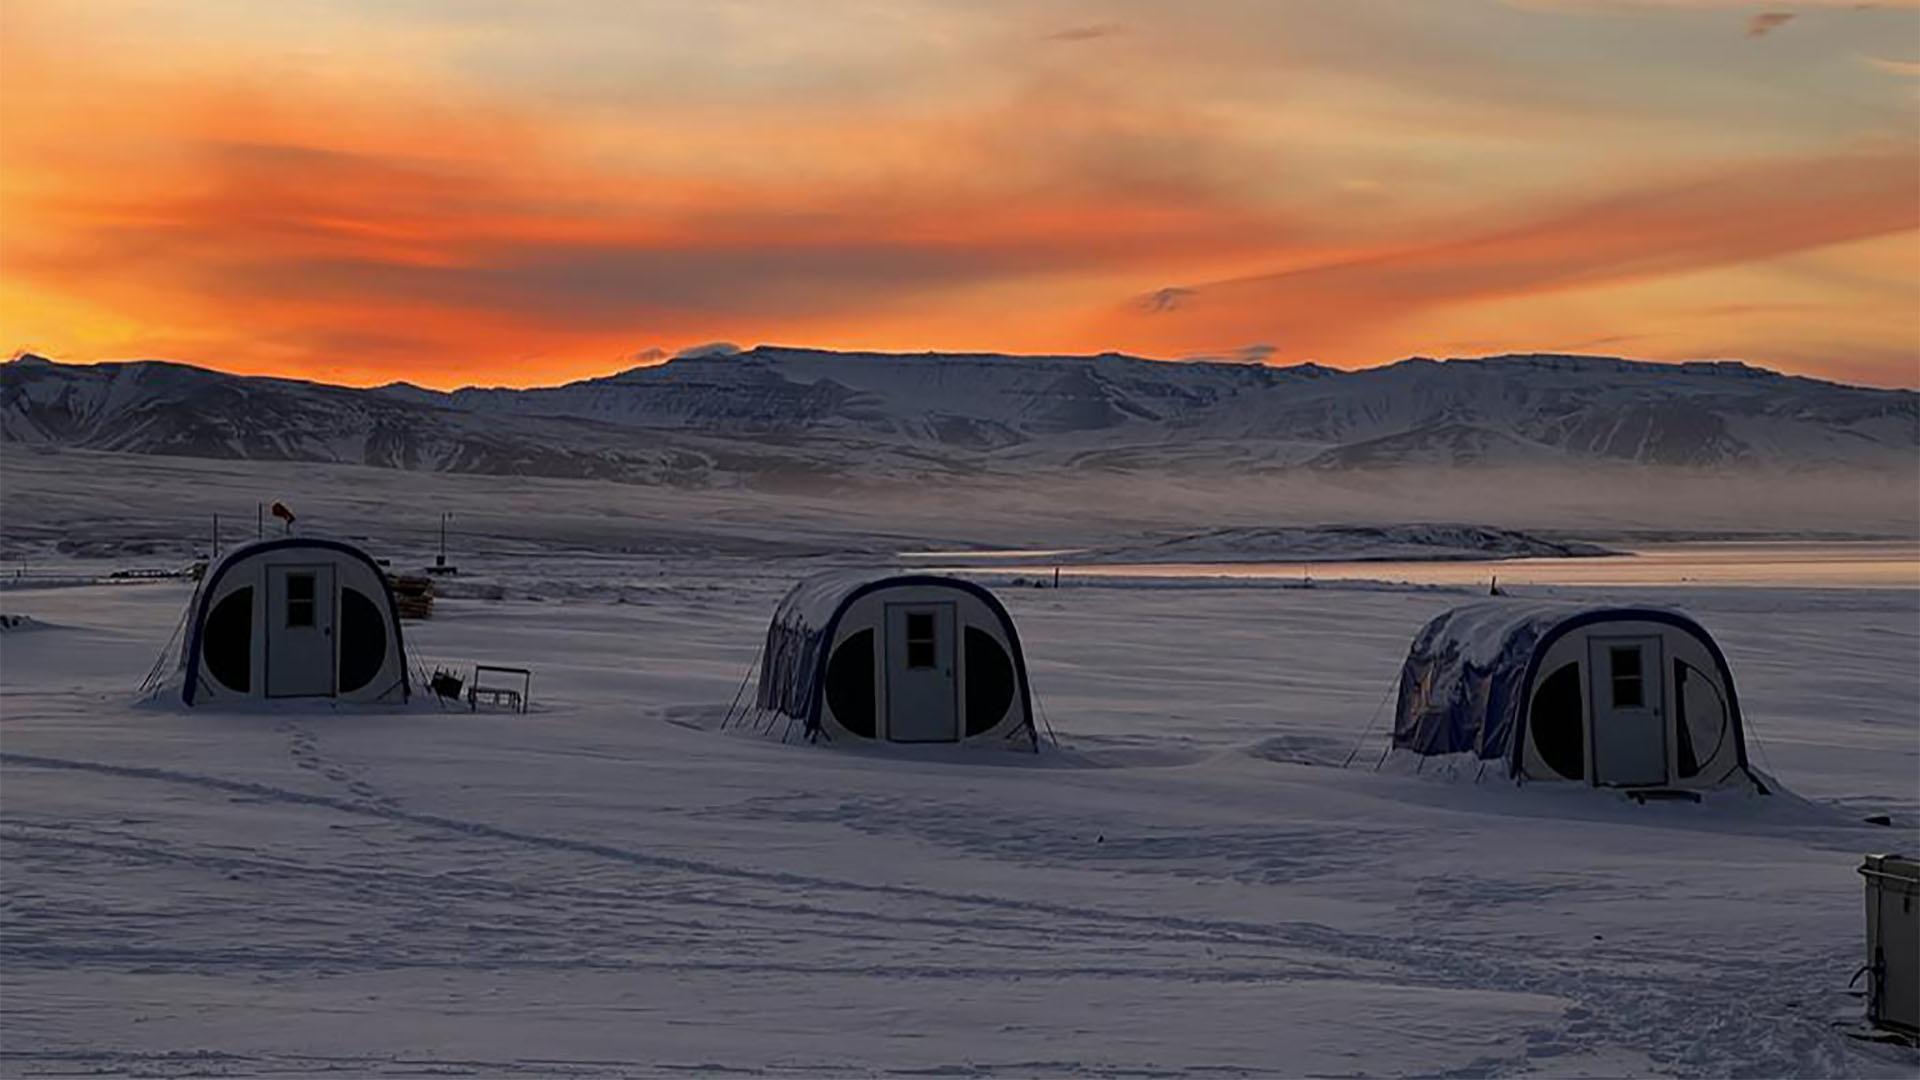 Image of a sunset over three tents.